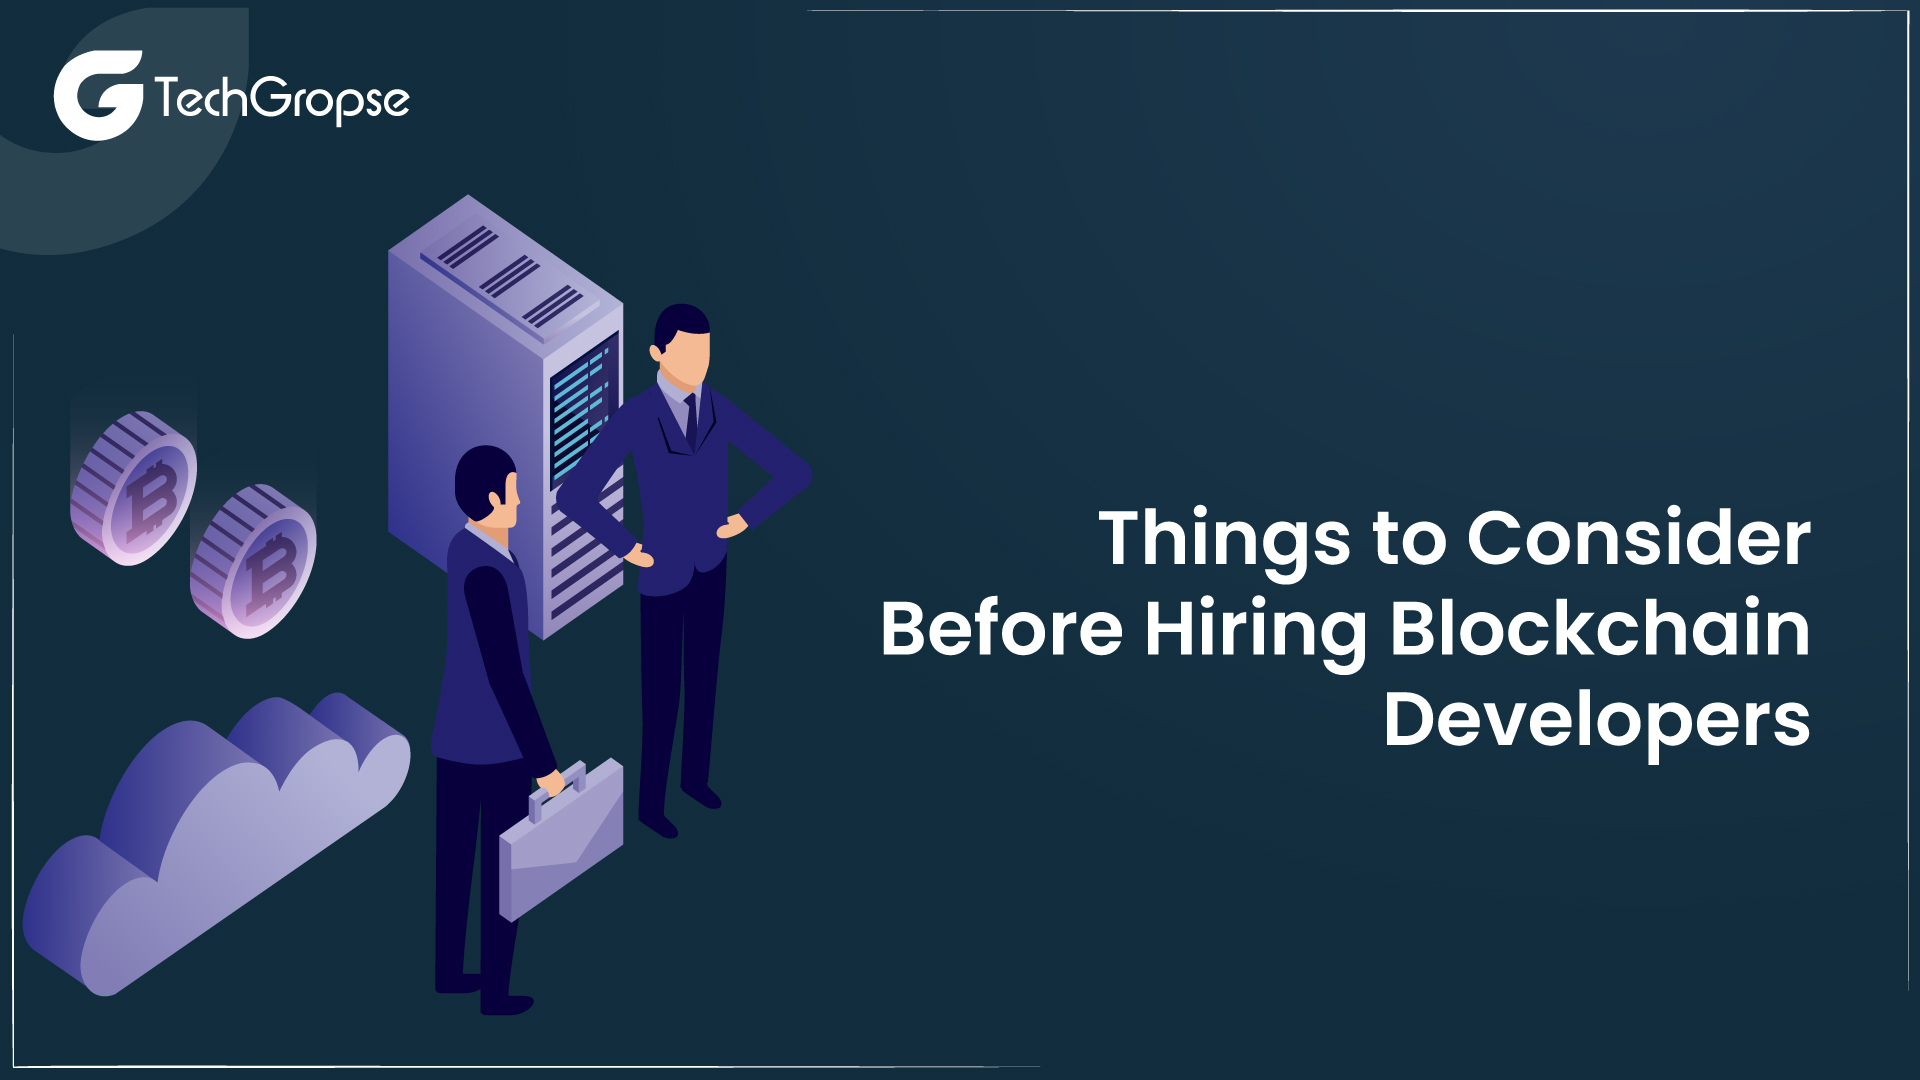 Things to Consider Before Hiring Blockchain Developers